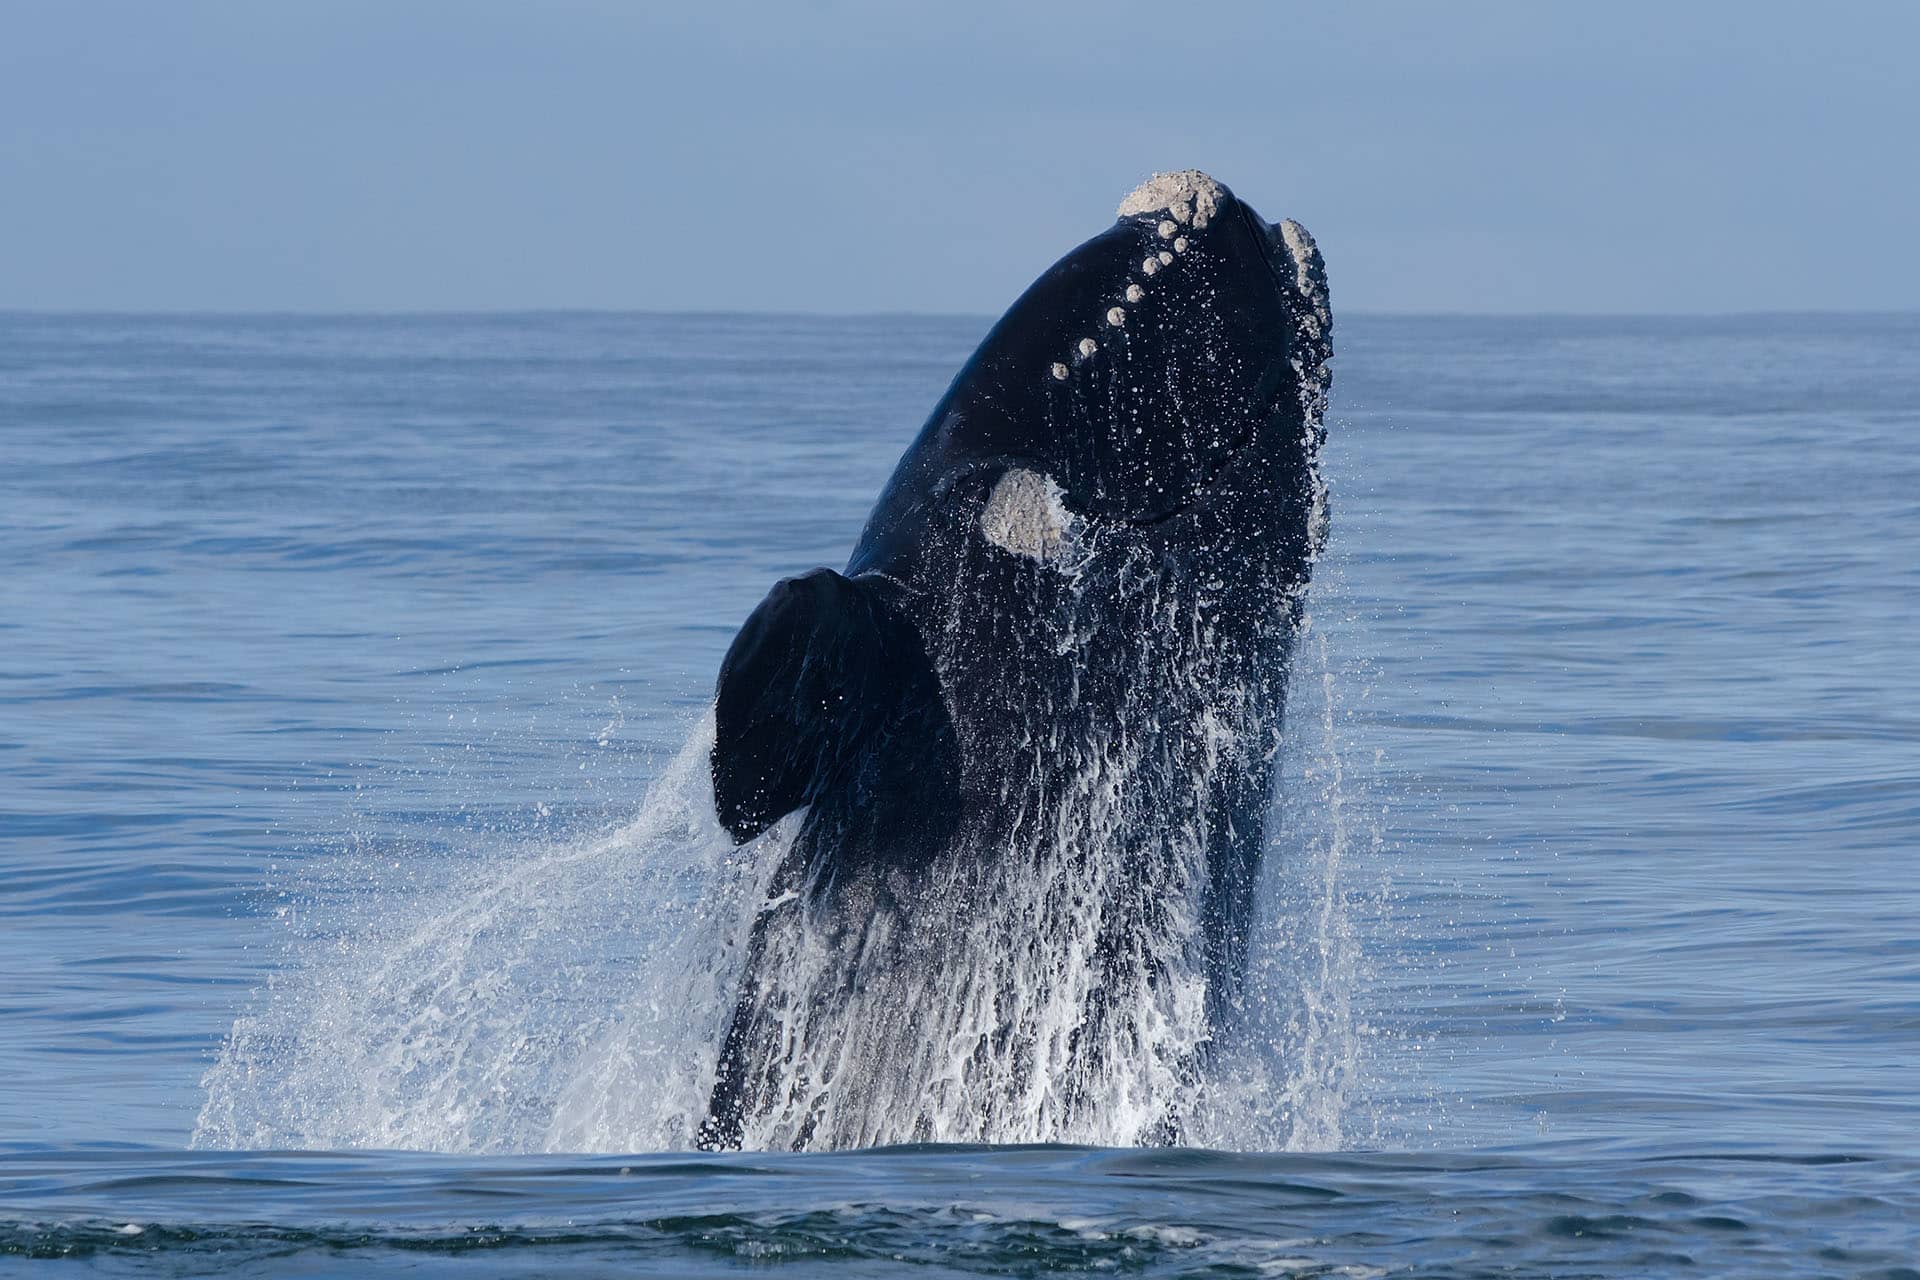 A breaching southern right whale - an animal that makes up the Marine Big Five in South Africa.